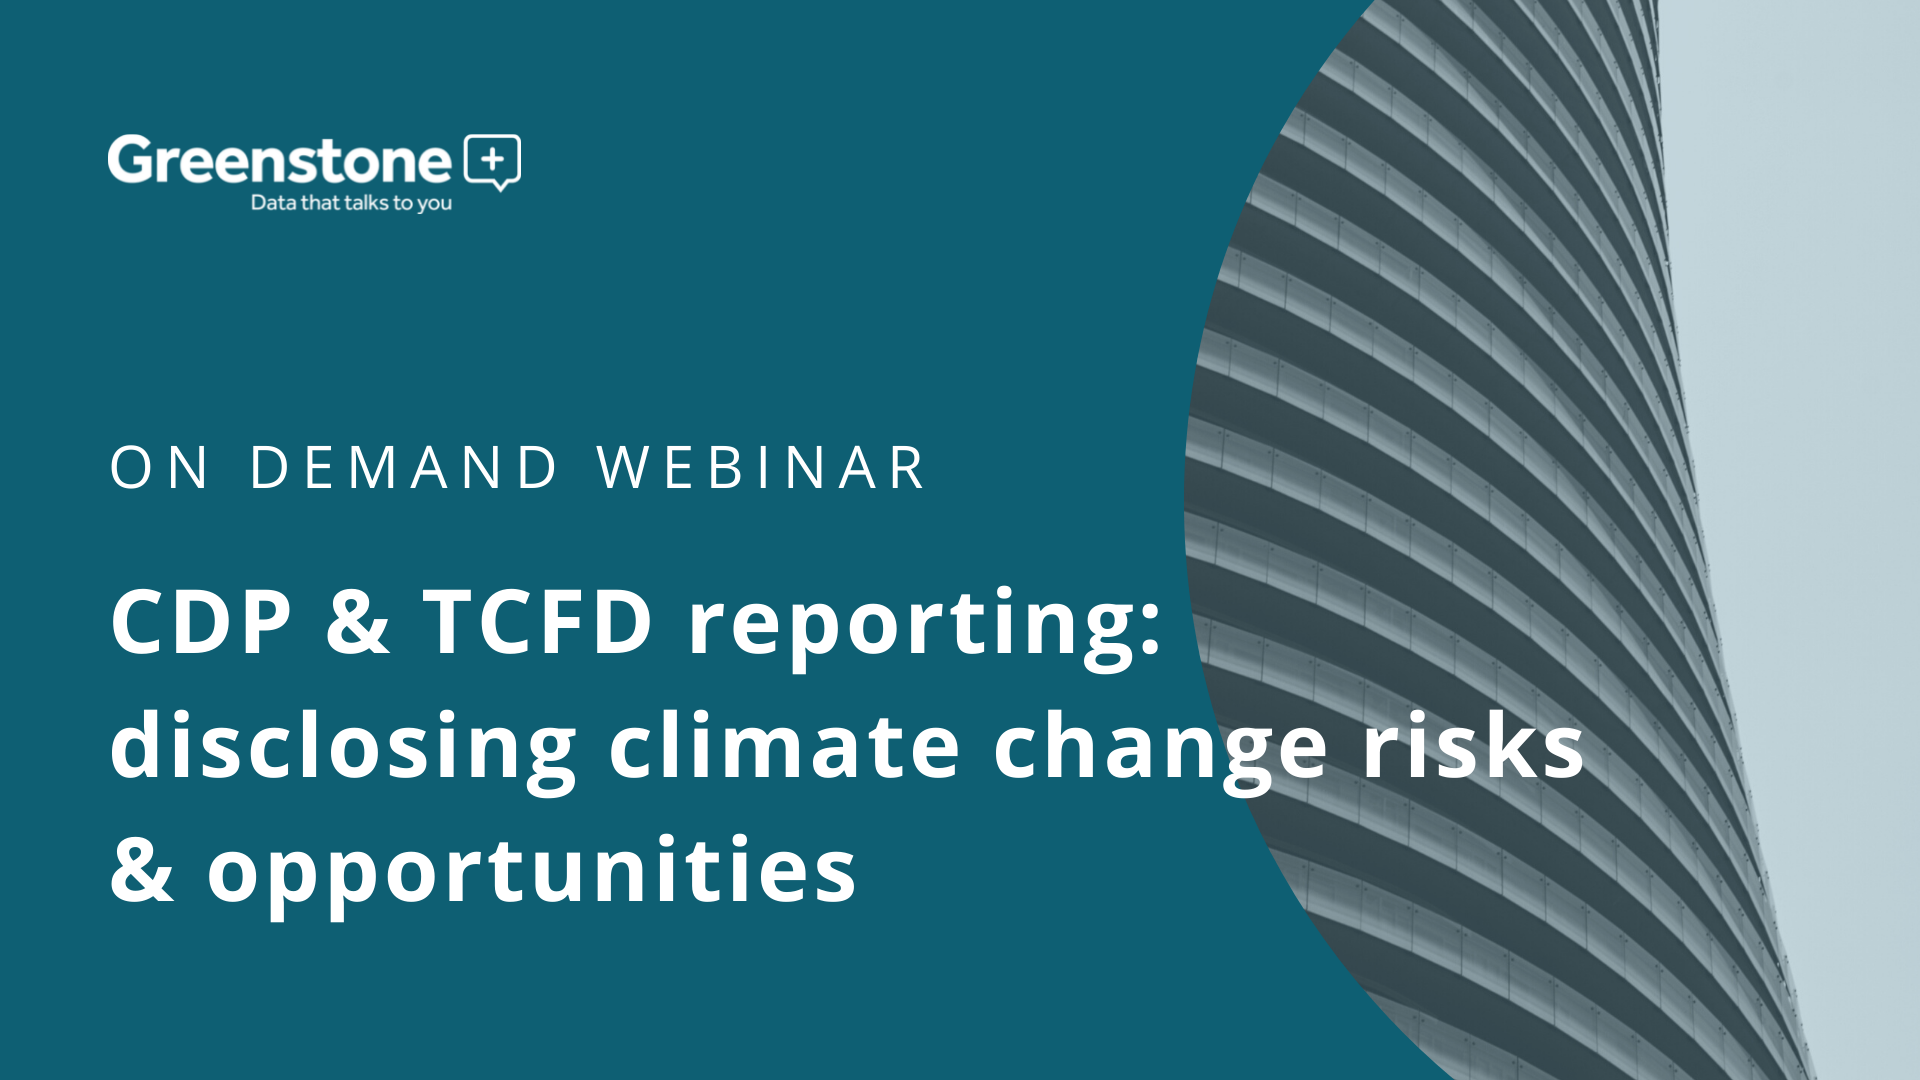 CDP & TCFD reporting: disclosing climate change risks & opportunities